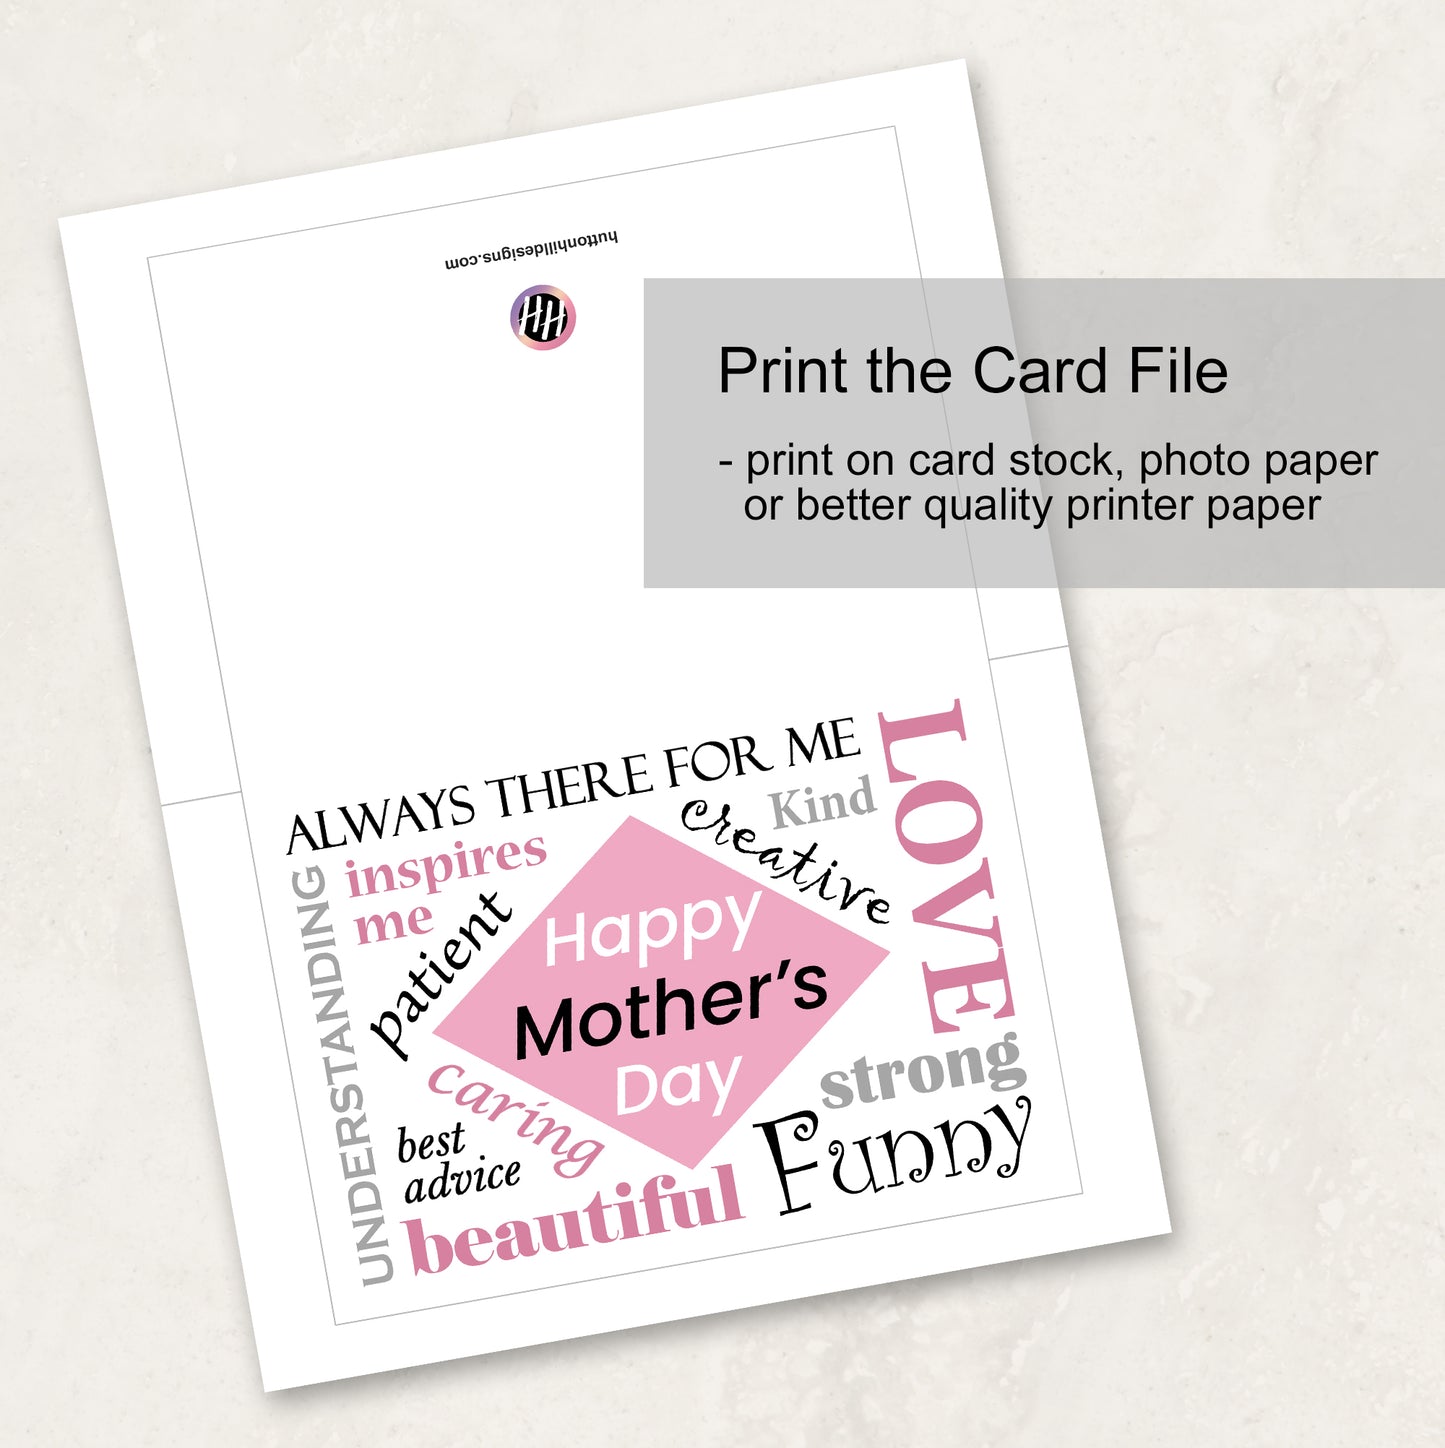 Printable Mother's Day Card Instant Download with Envelope Files